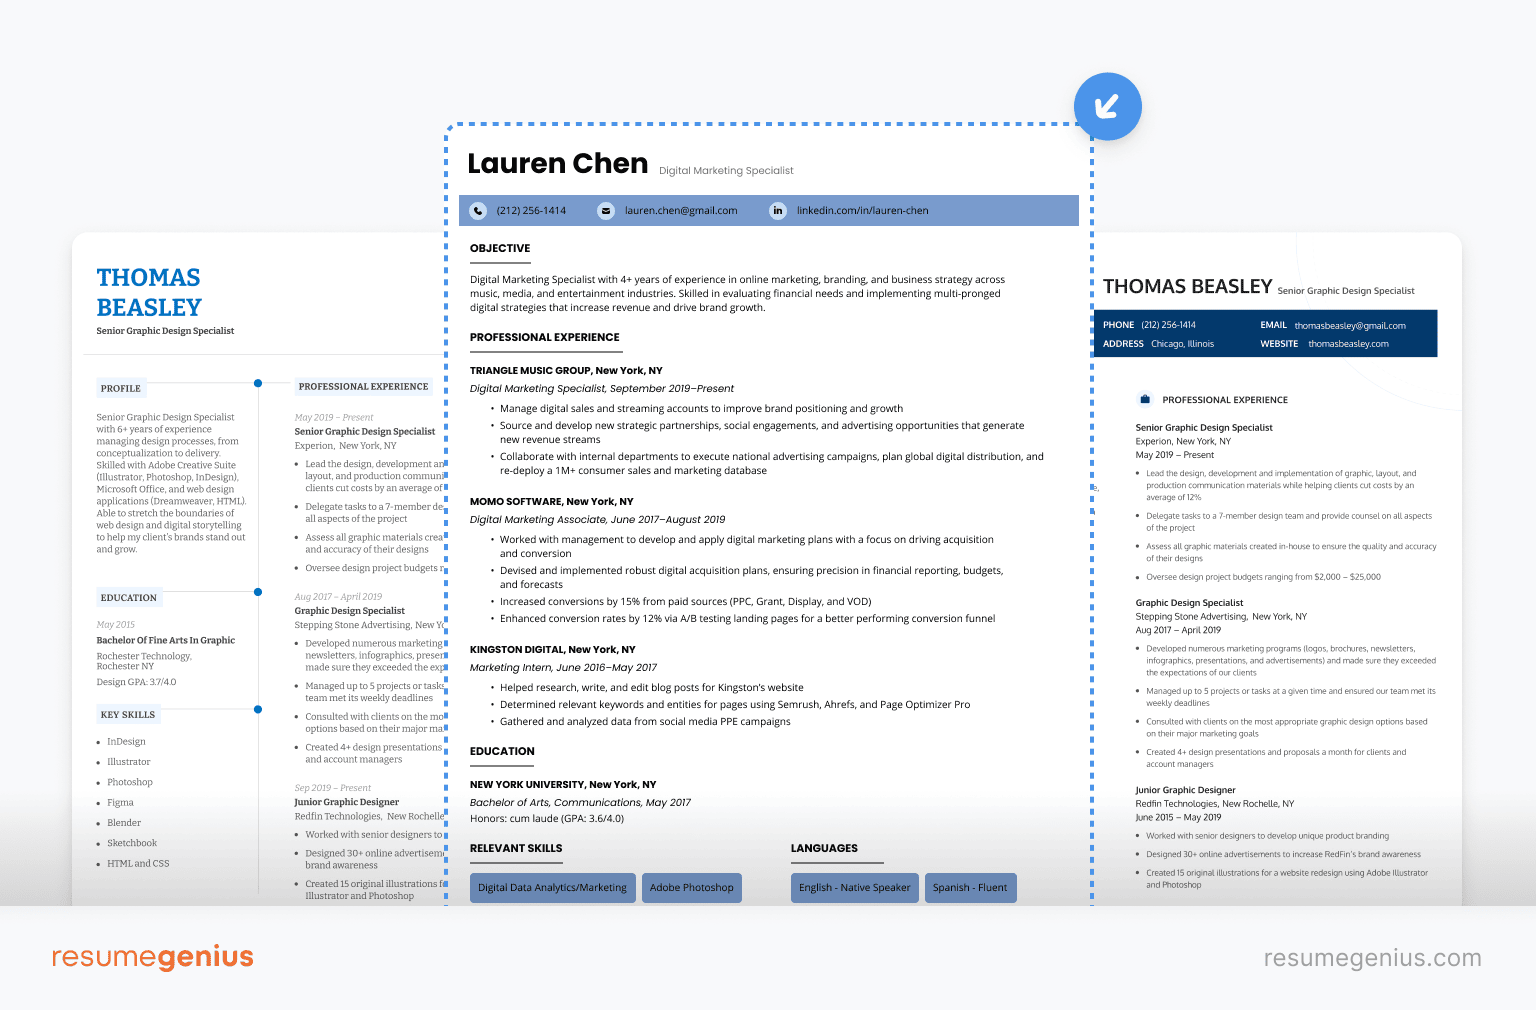 An example of a candidate selecting the formatting and style of their CV